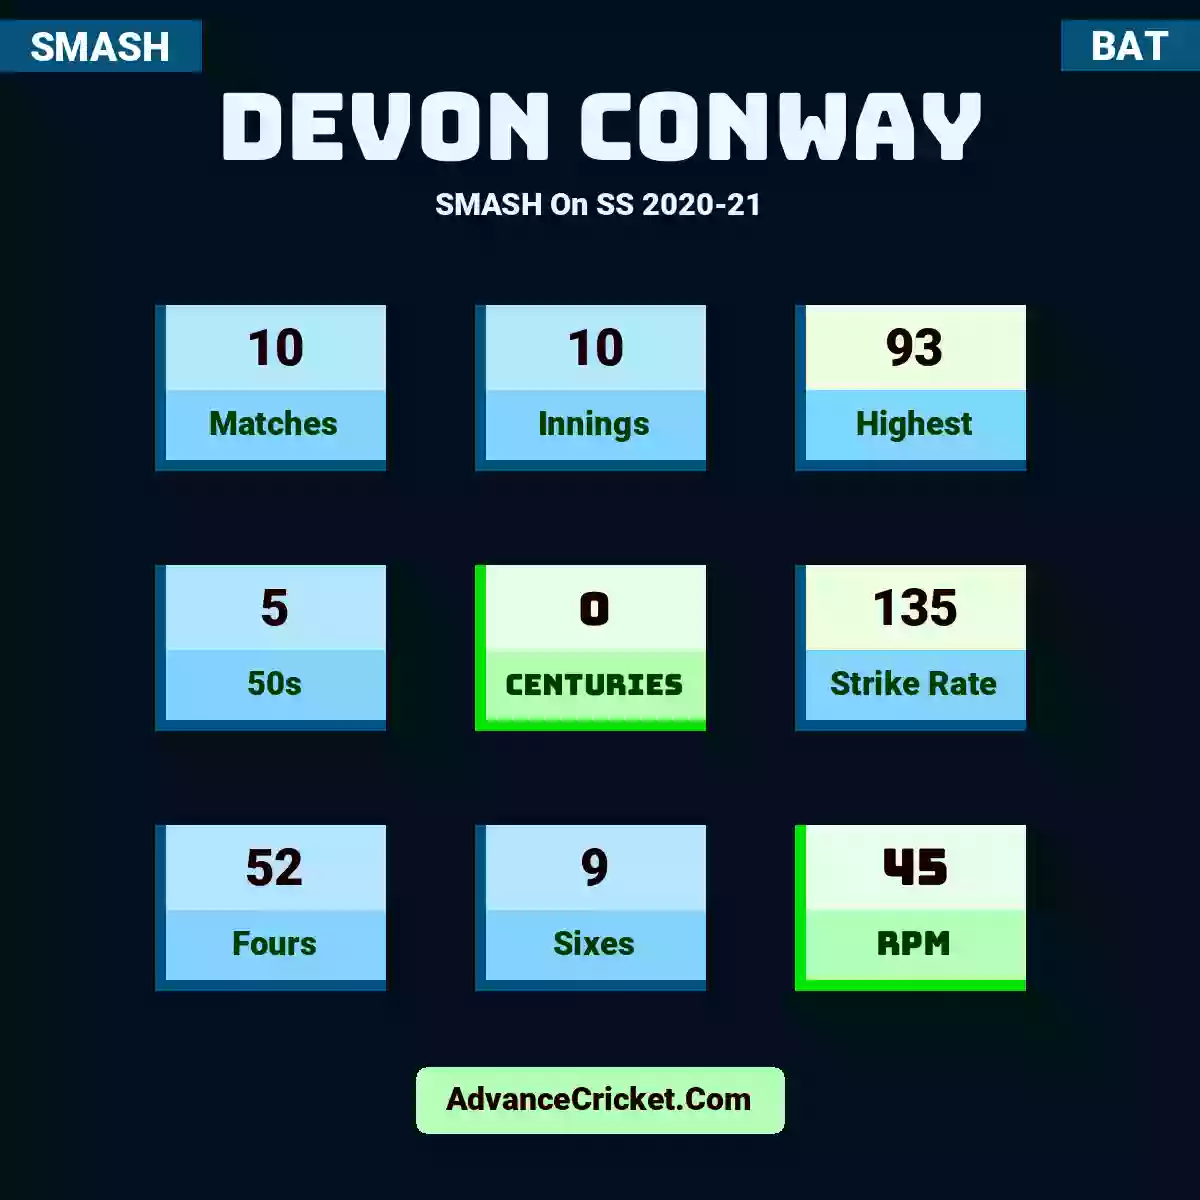 Devon Conway SMASH  On SS 2020-21, Devon Conway played 10 matches, scored 93 runs as highest, 5 half-centuries, and 0 centuries, with a strike rate of 135. D.Conway hit 52 fours and 9 sixes, with an RPM of 45.